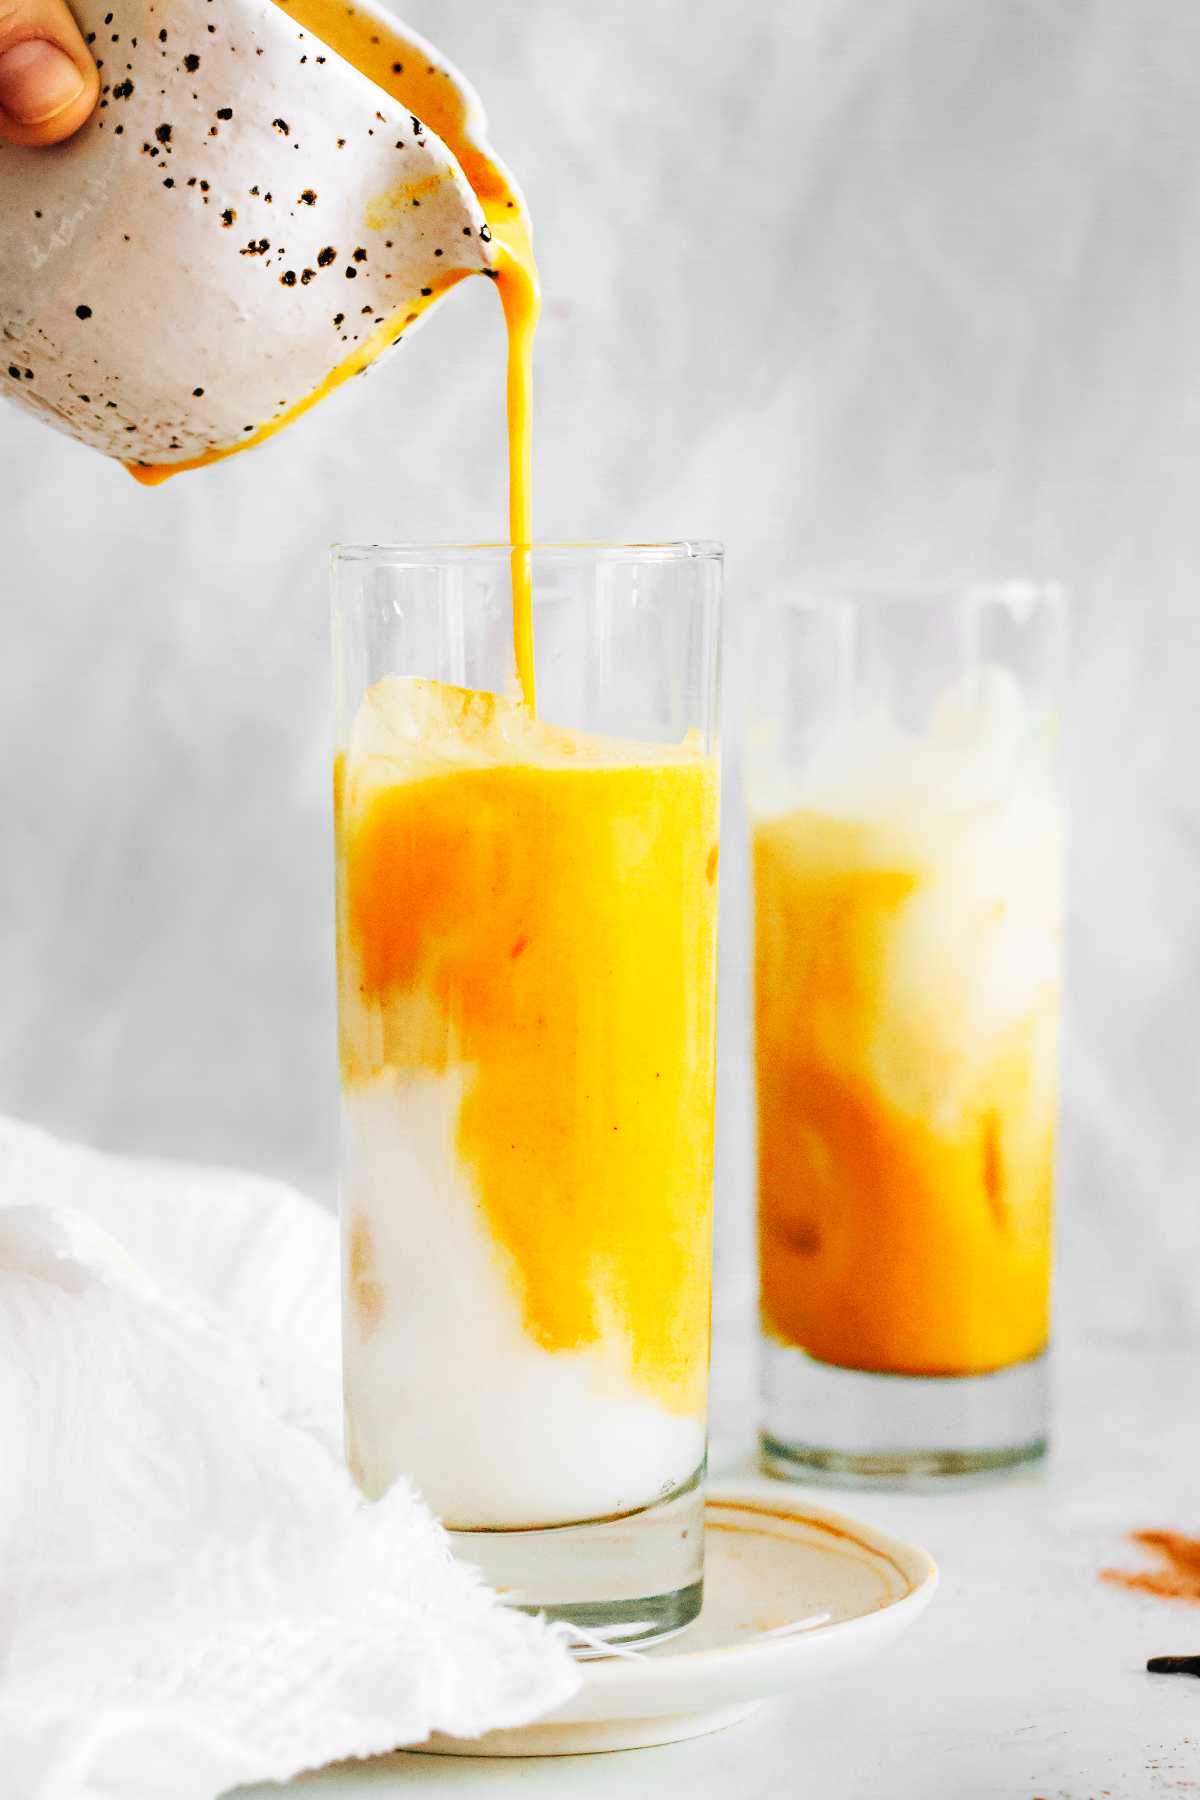 pouring golden milk into ice cubes in glasses